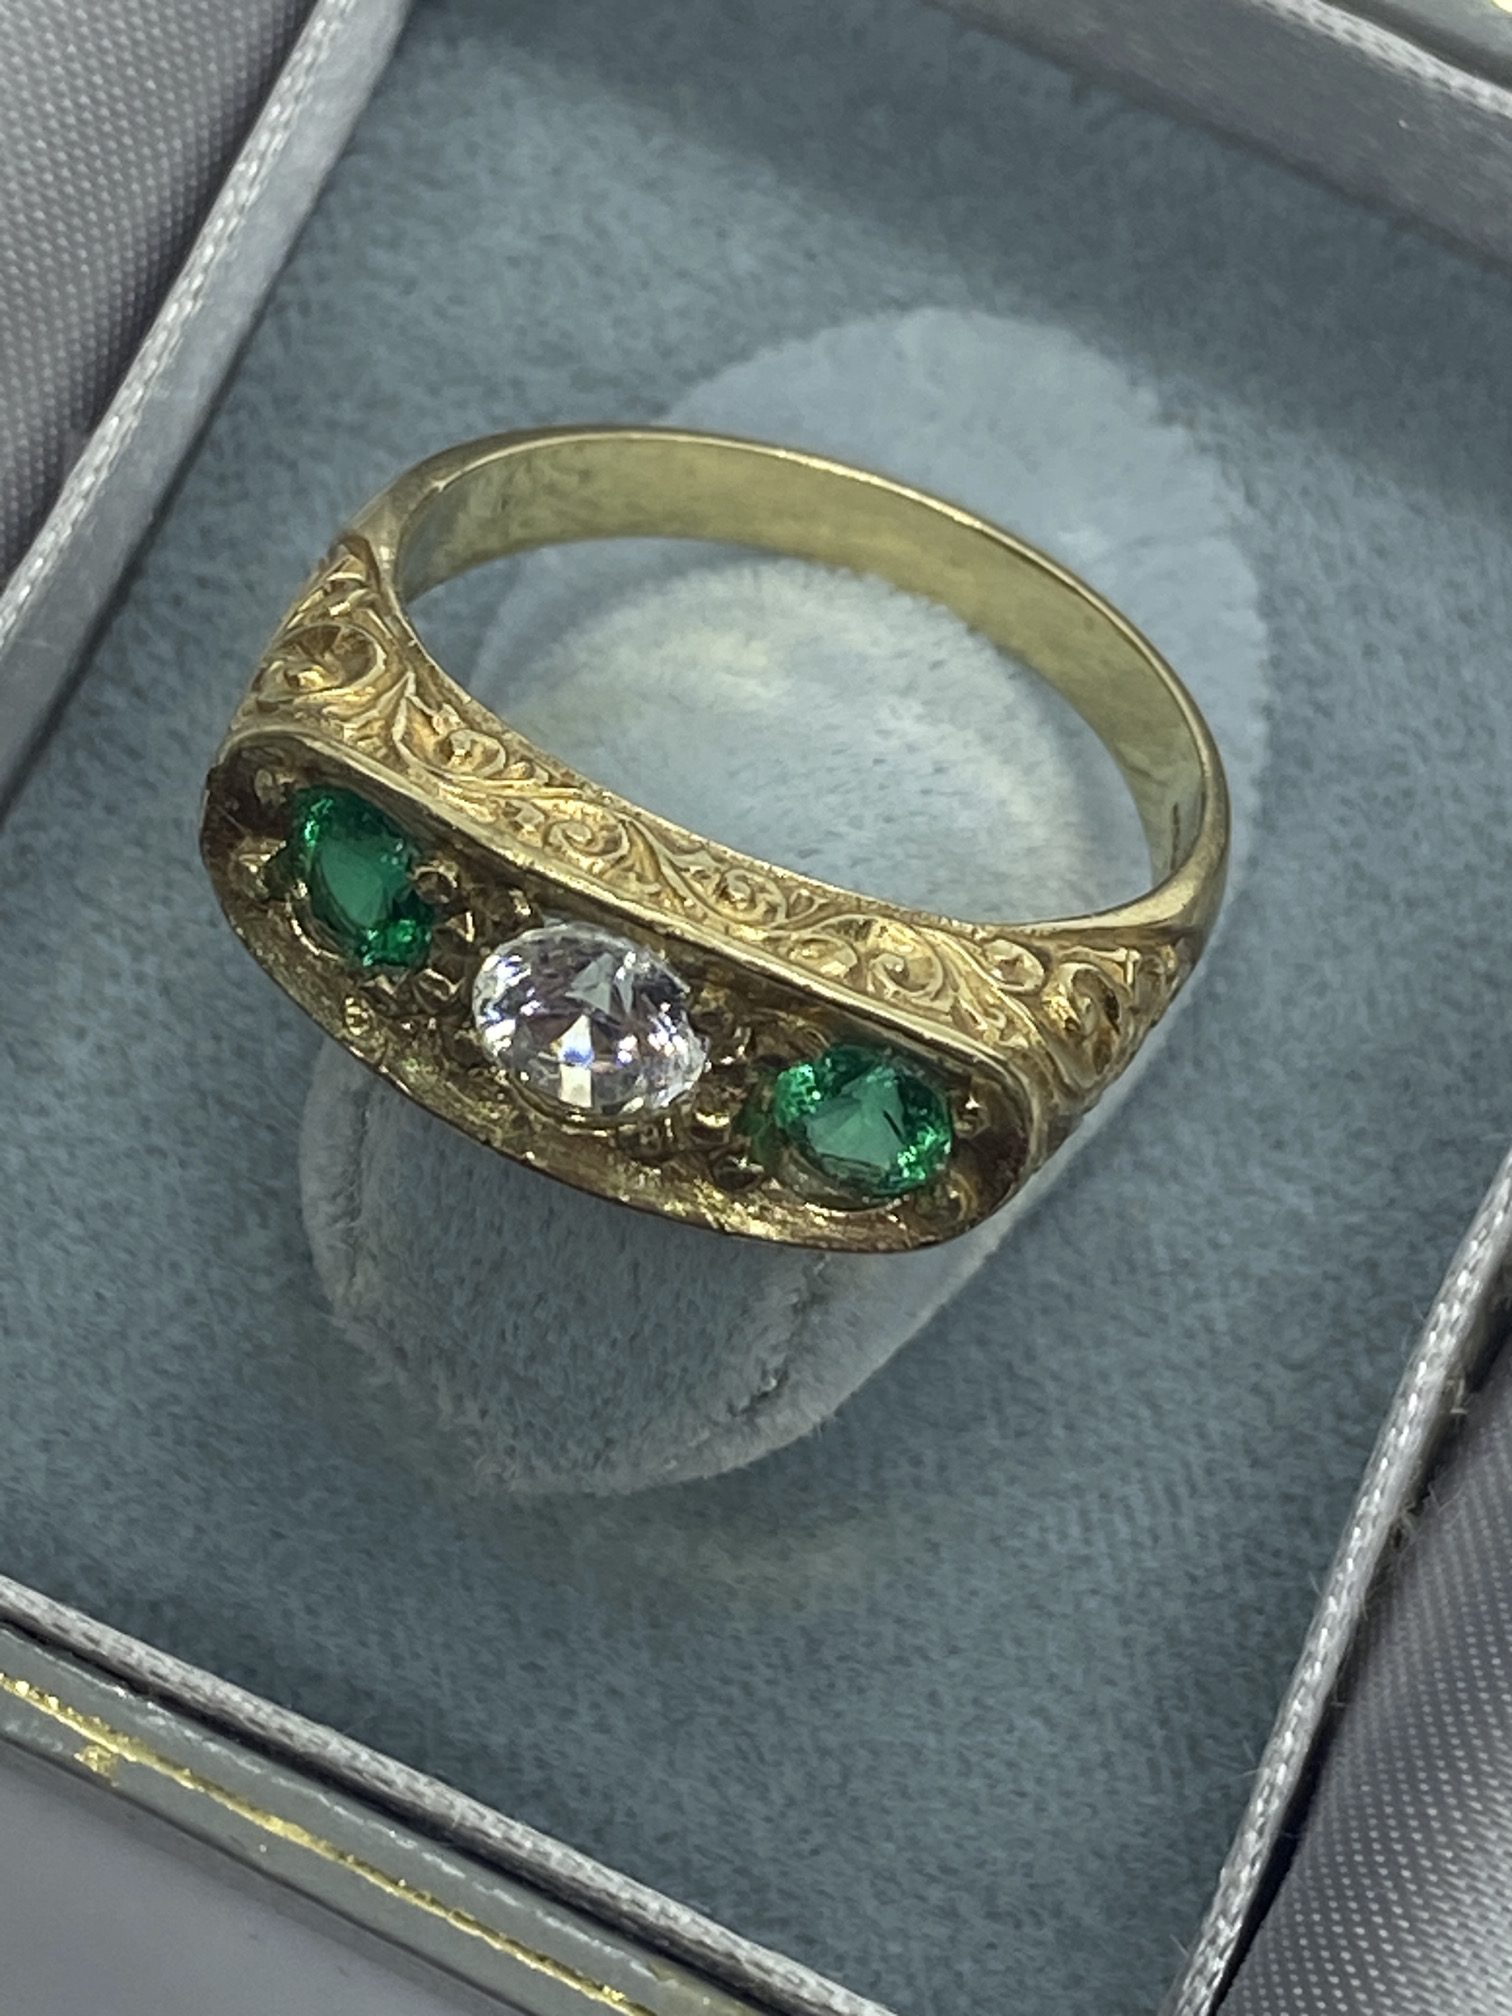 GENTS GREEN & WHITE STONE 9ct GOLD RING  - Image 2 of 3